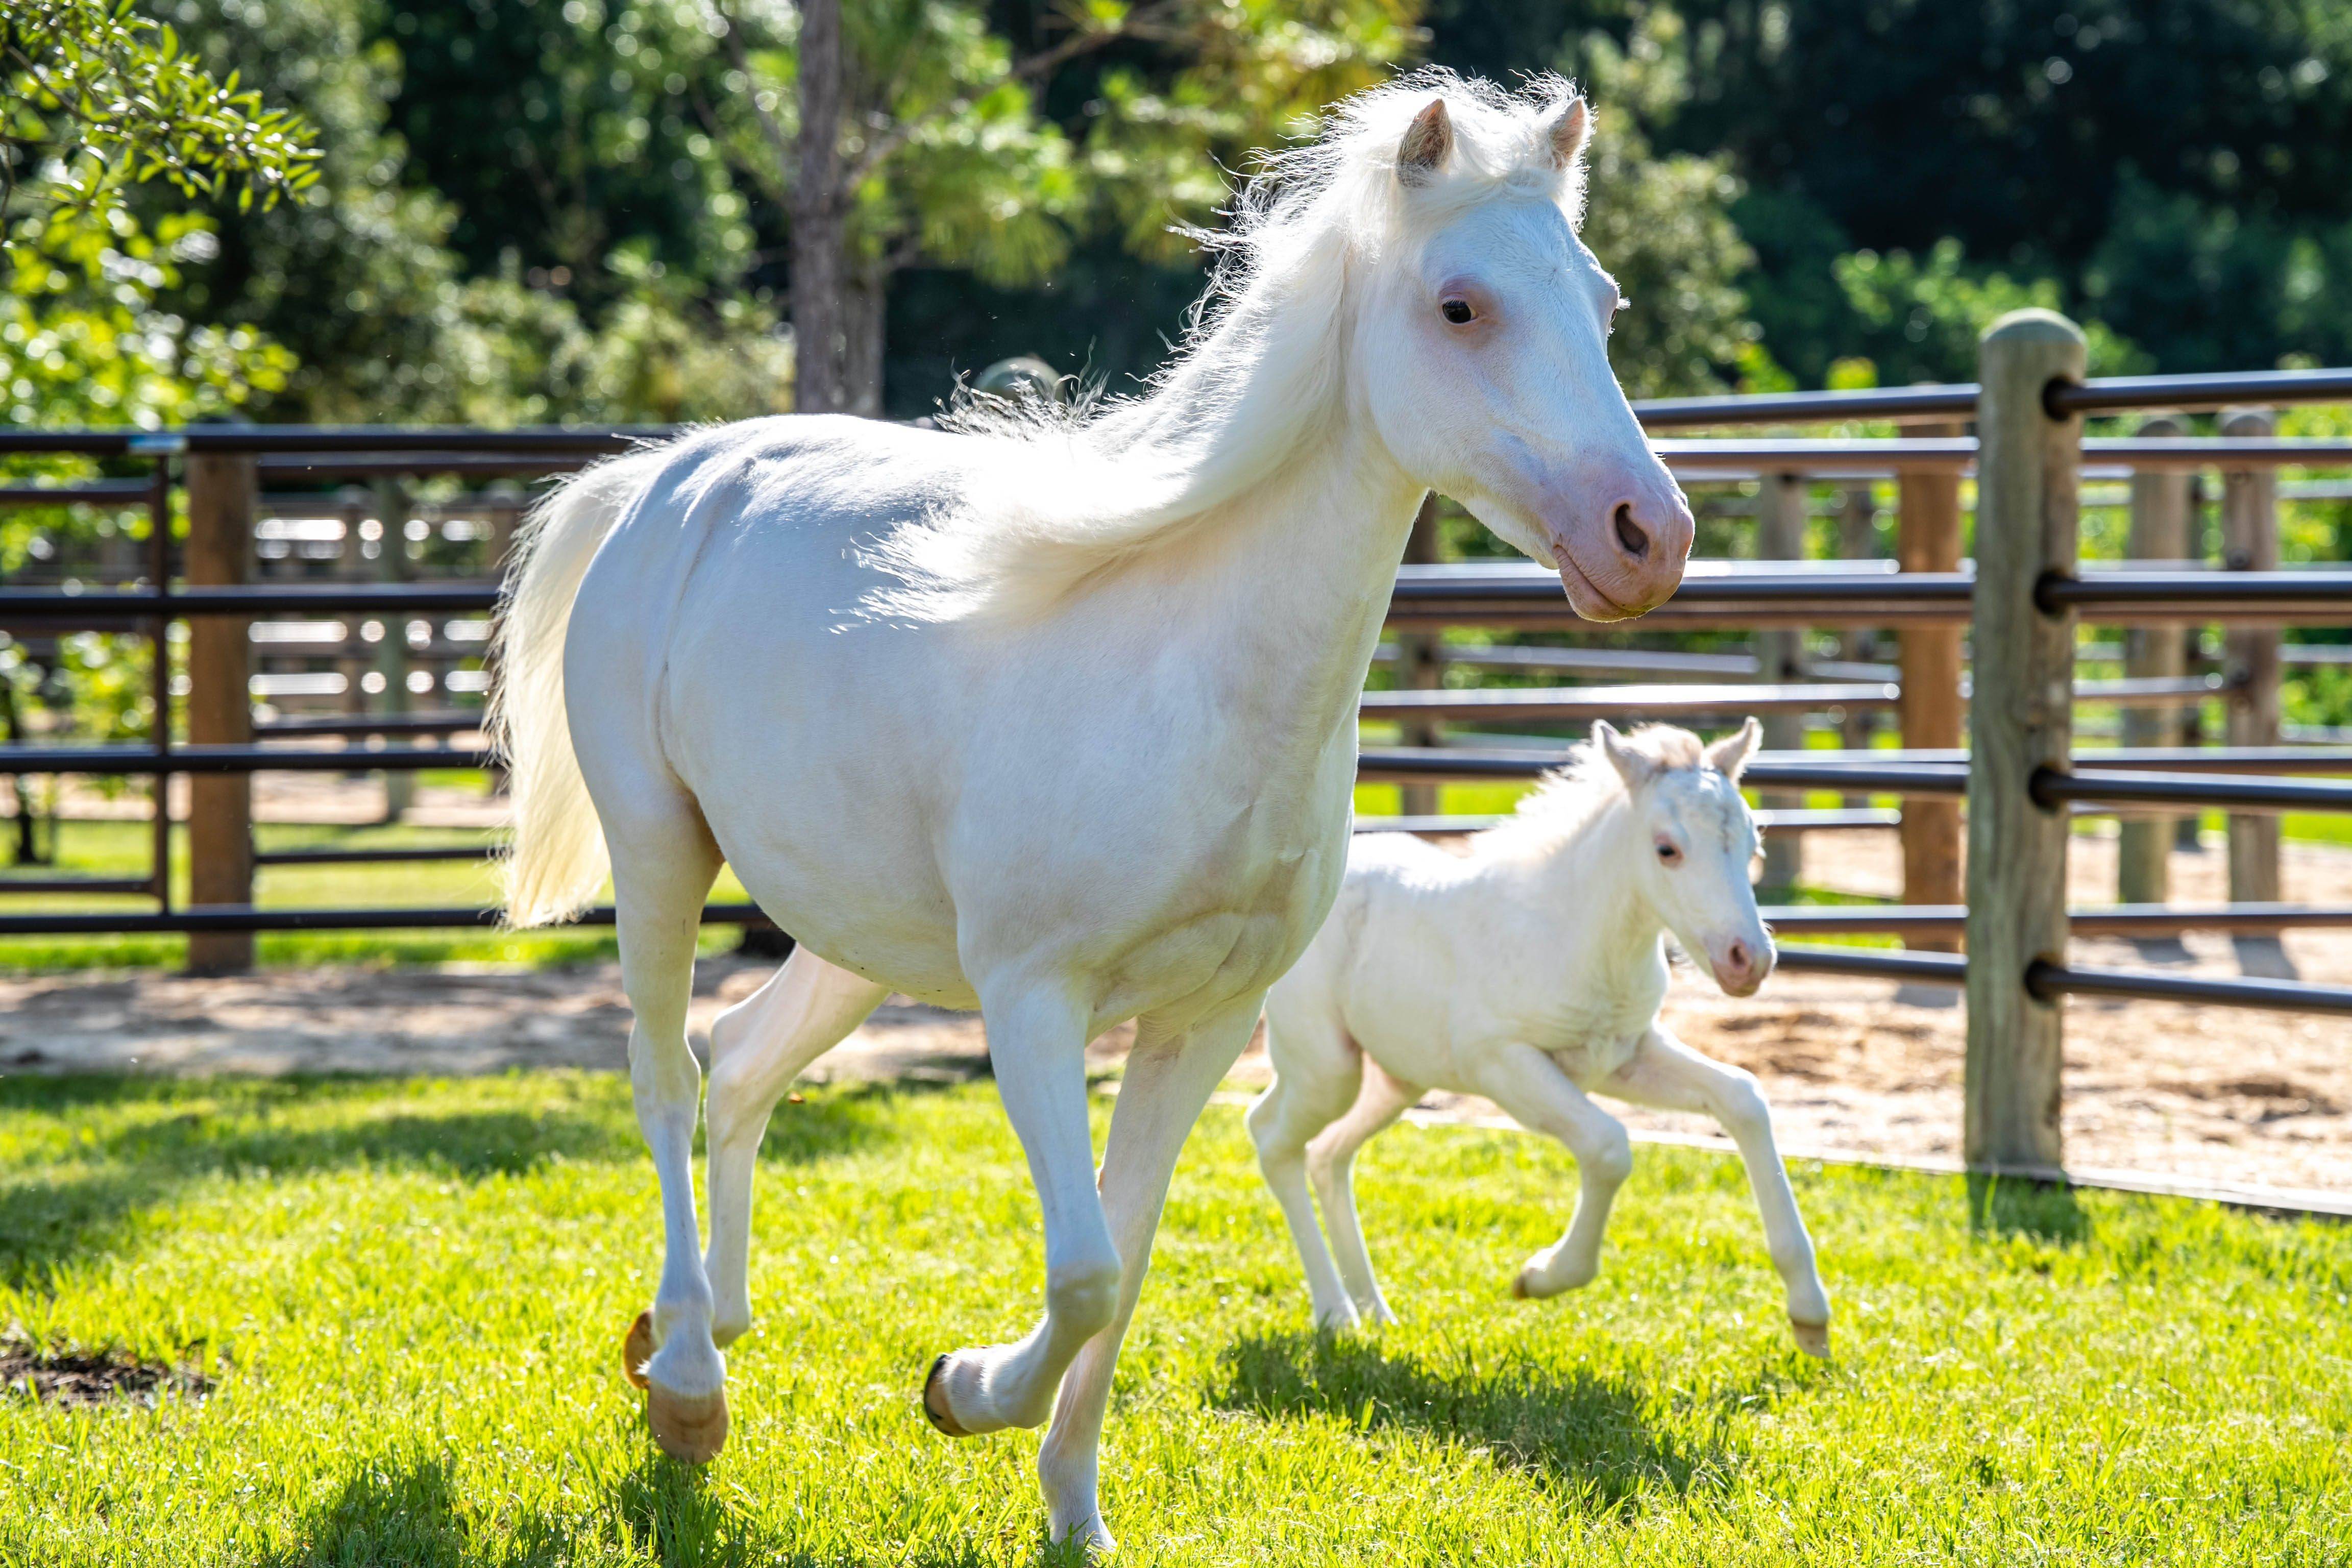 Pixie the Shetland pony foal was born at Tri-Circle-D Ranch at Disney’s Fort Wilderness Resort & Campground.